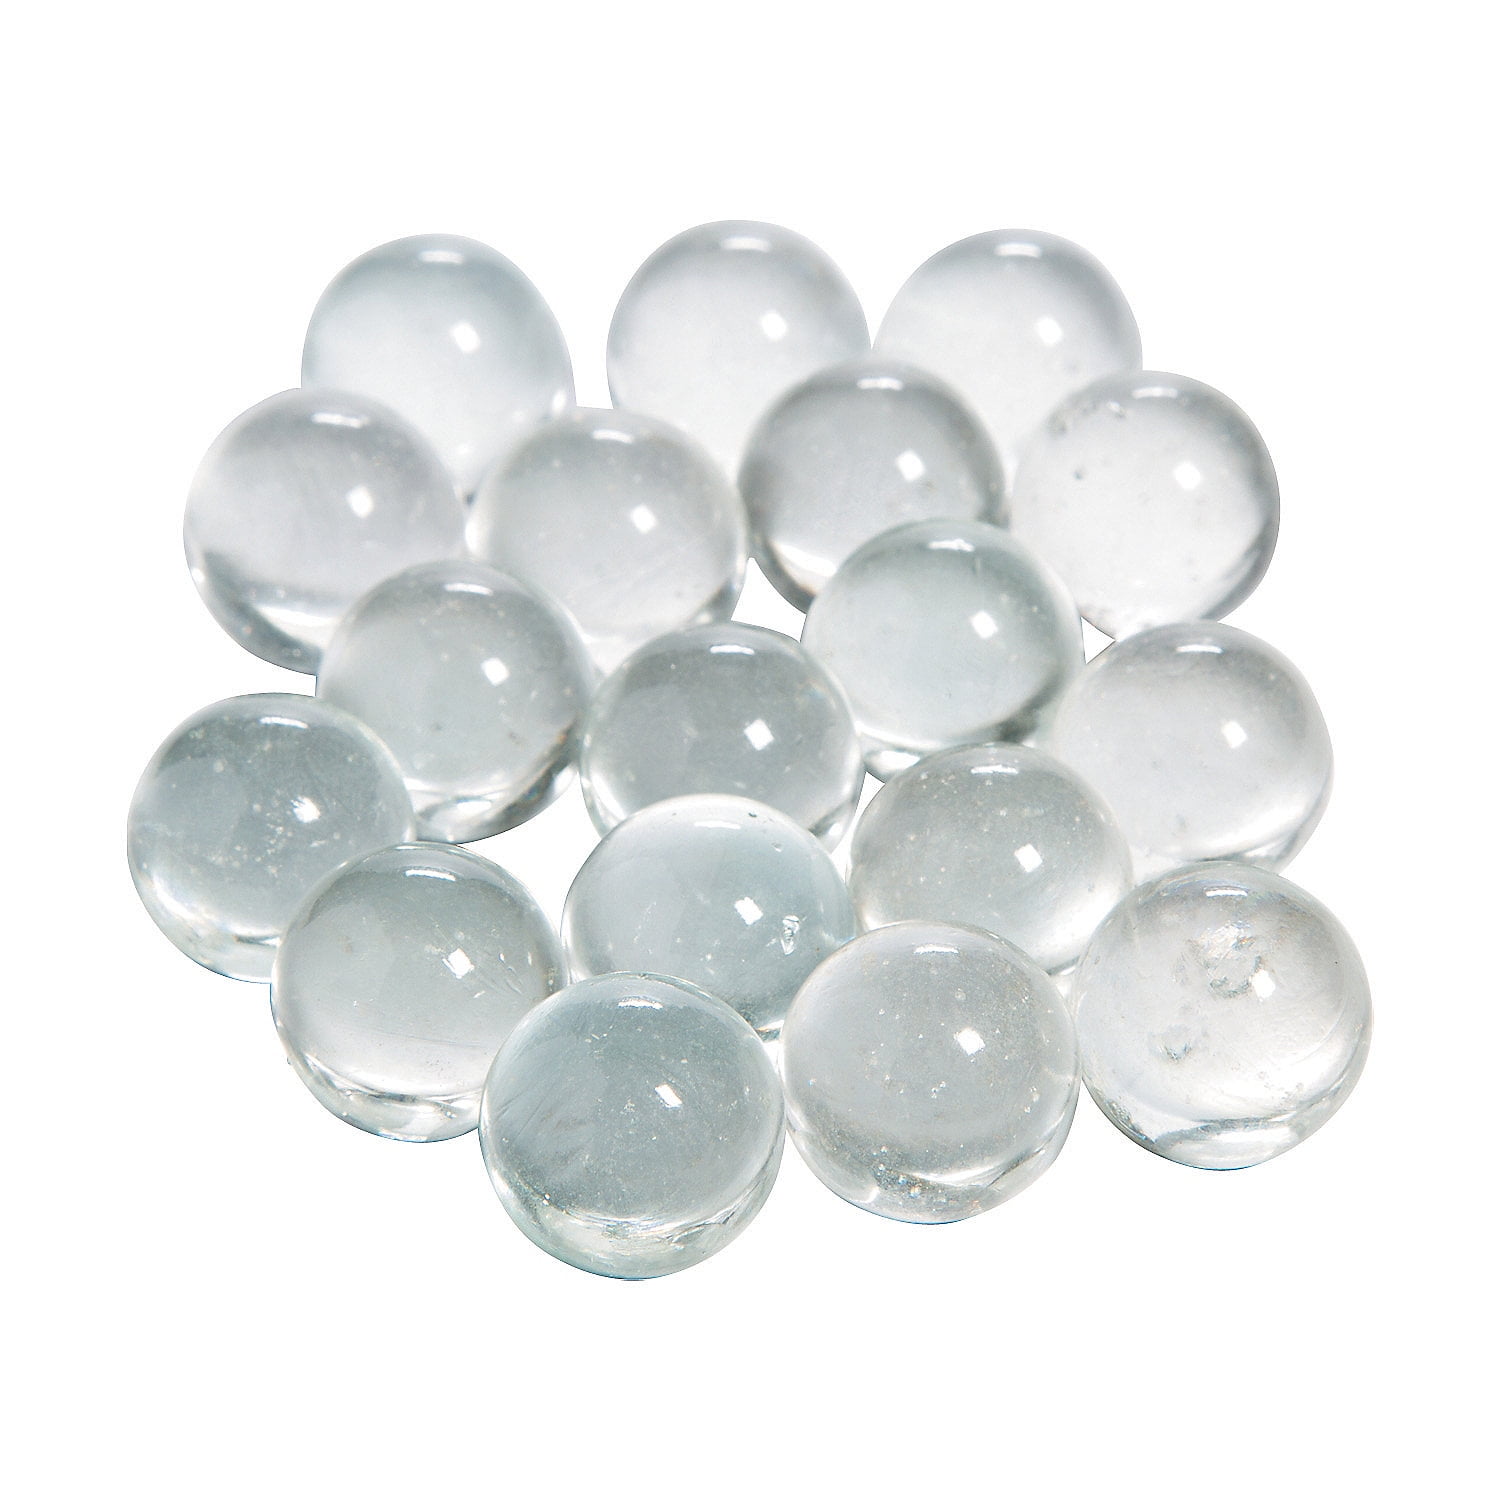 CLEAR GLASS MARBLES 10 POUNDS 9/16 INCH  OLDER CHAMPION  $37.99 POSTPAID !! 